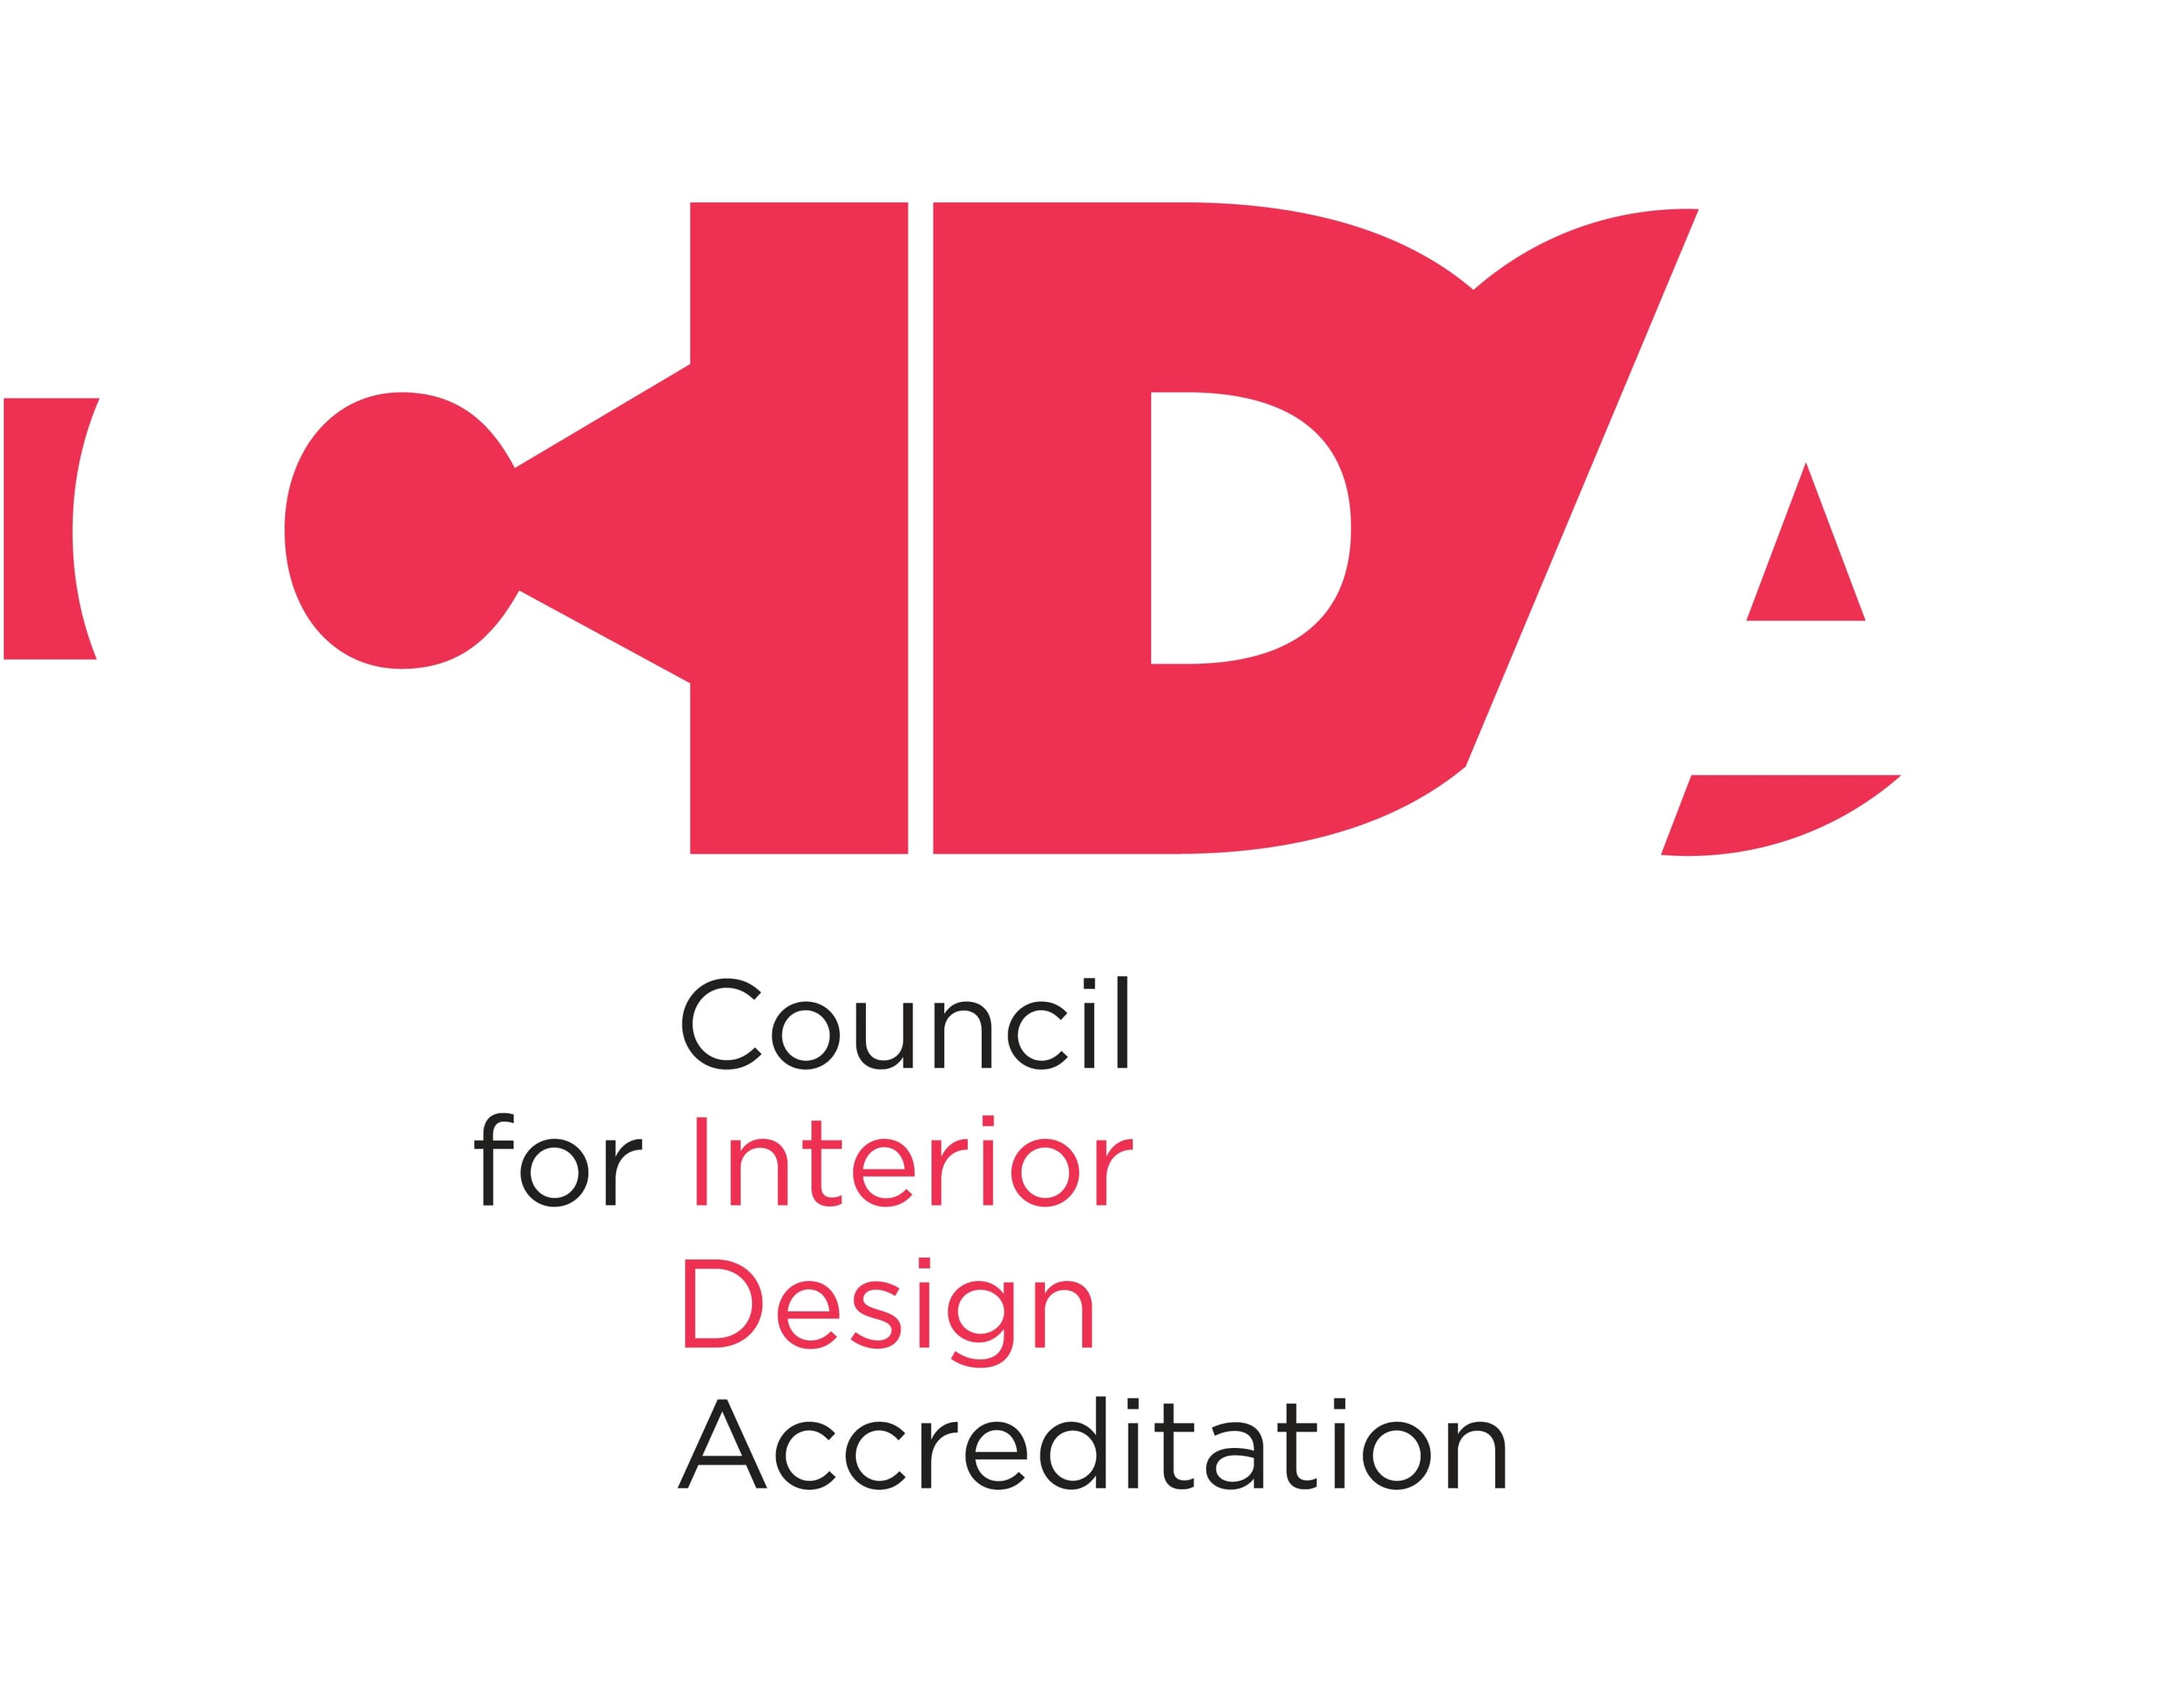 Link to Council for Interior Design Accreditation's website